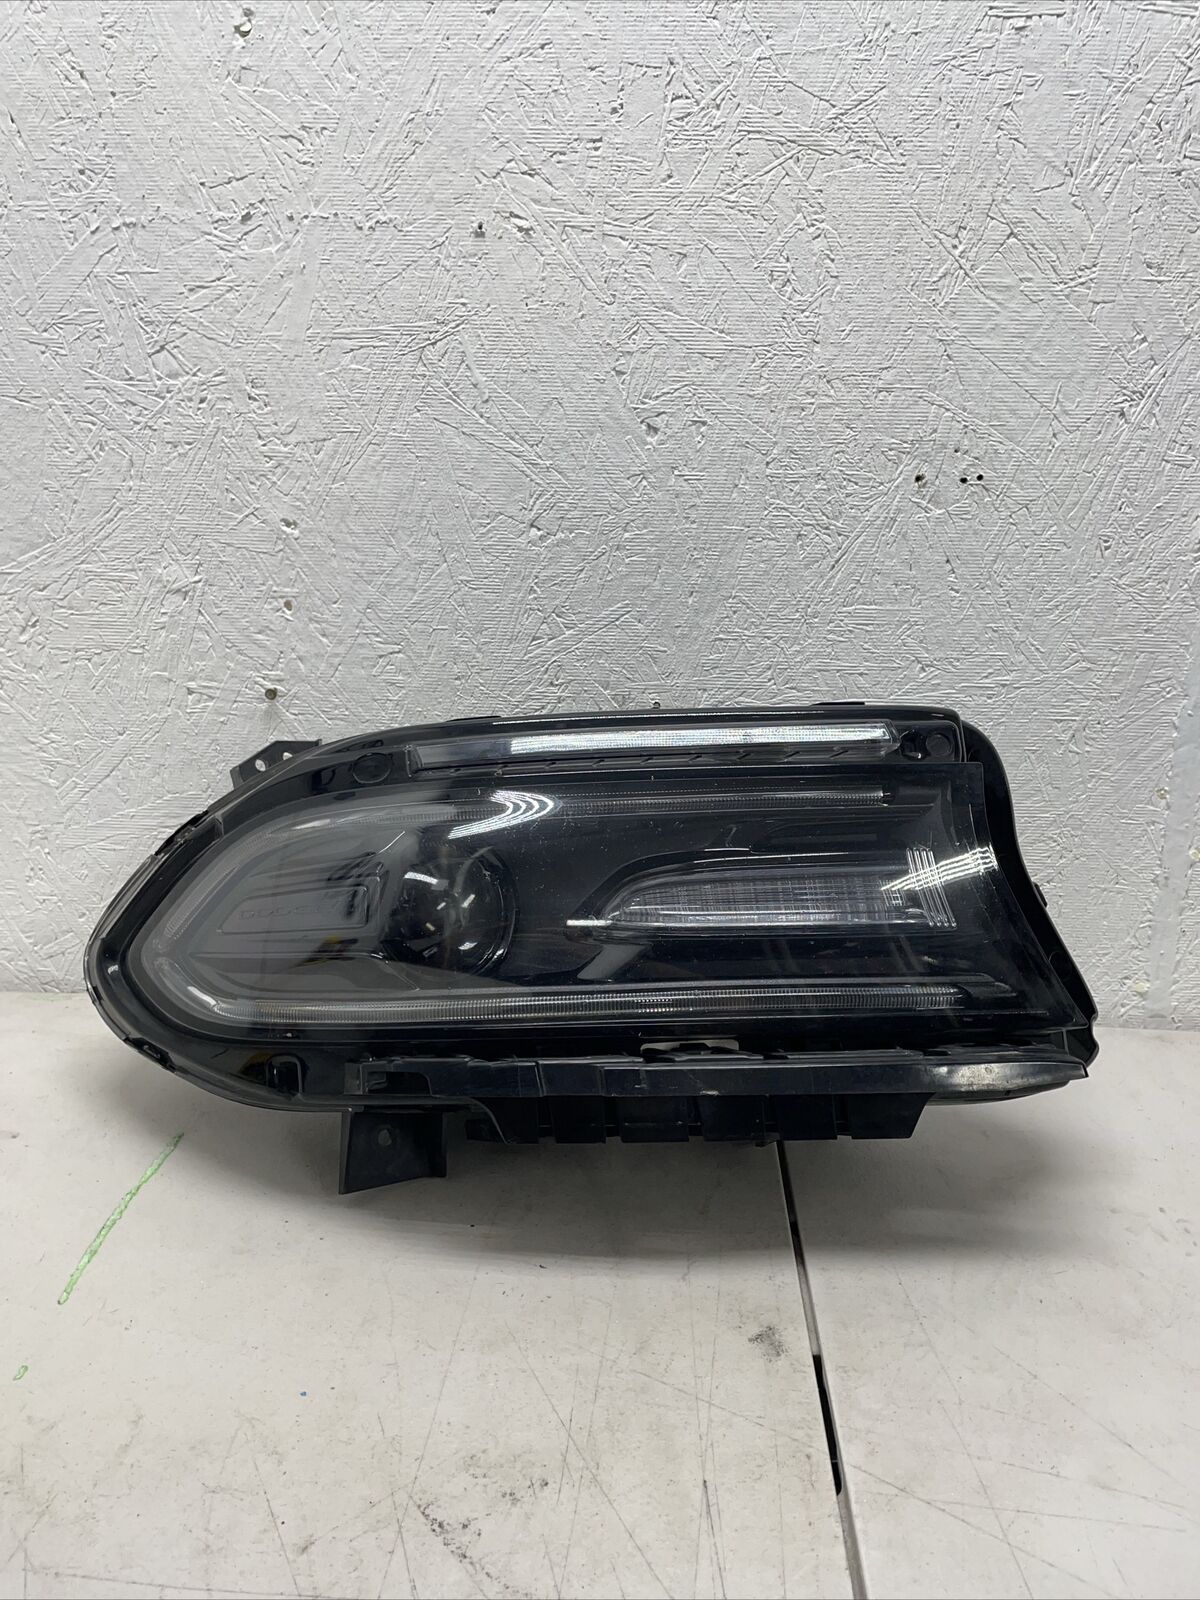 2018-2021 Dodge Charger 392 Right LED Headlight OEM #658